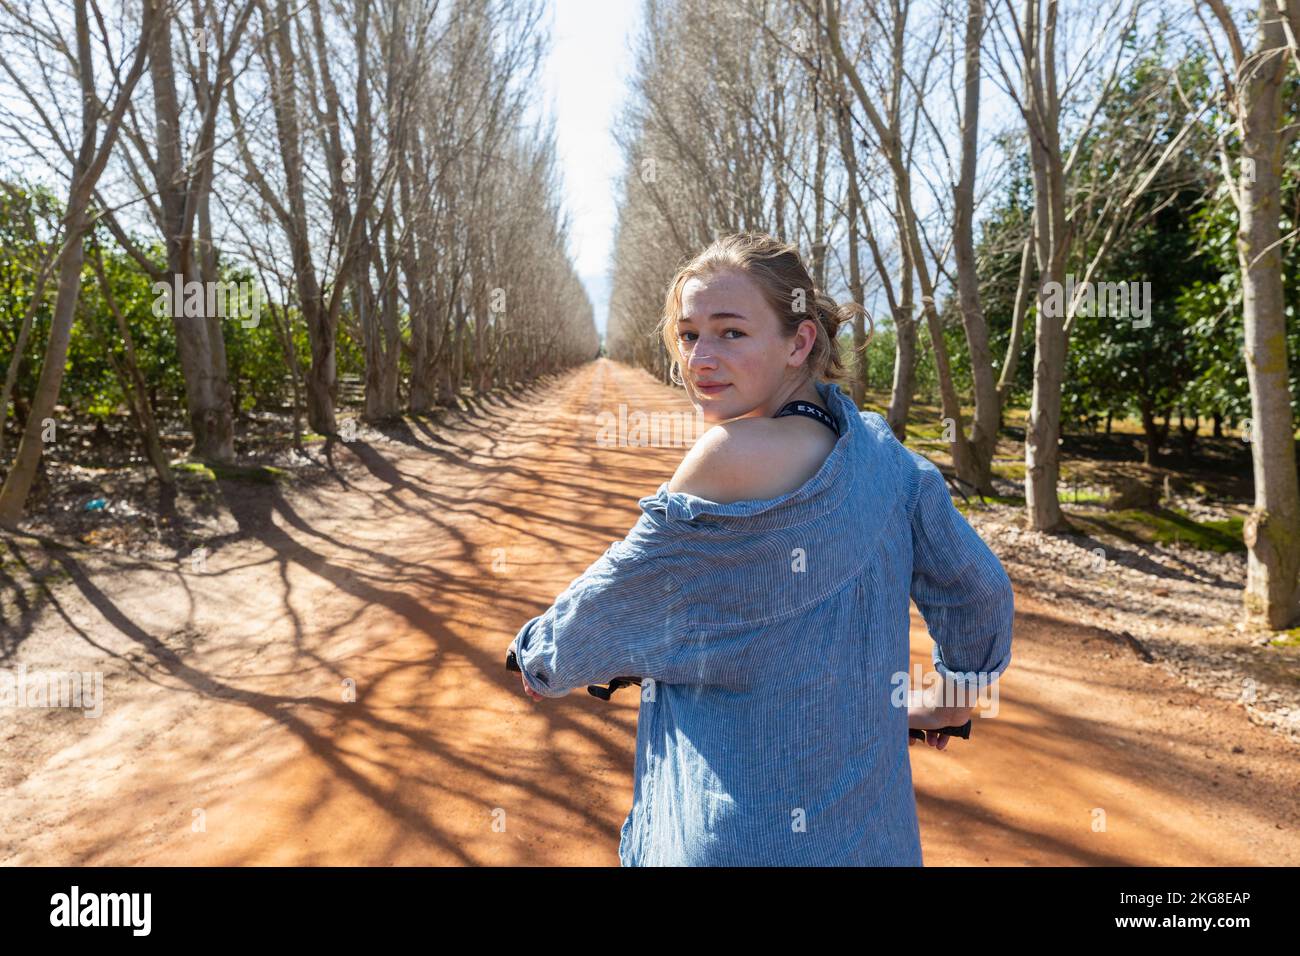 Teenage girl (16-17) riding bicycle on tree lined road Stock Photo